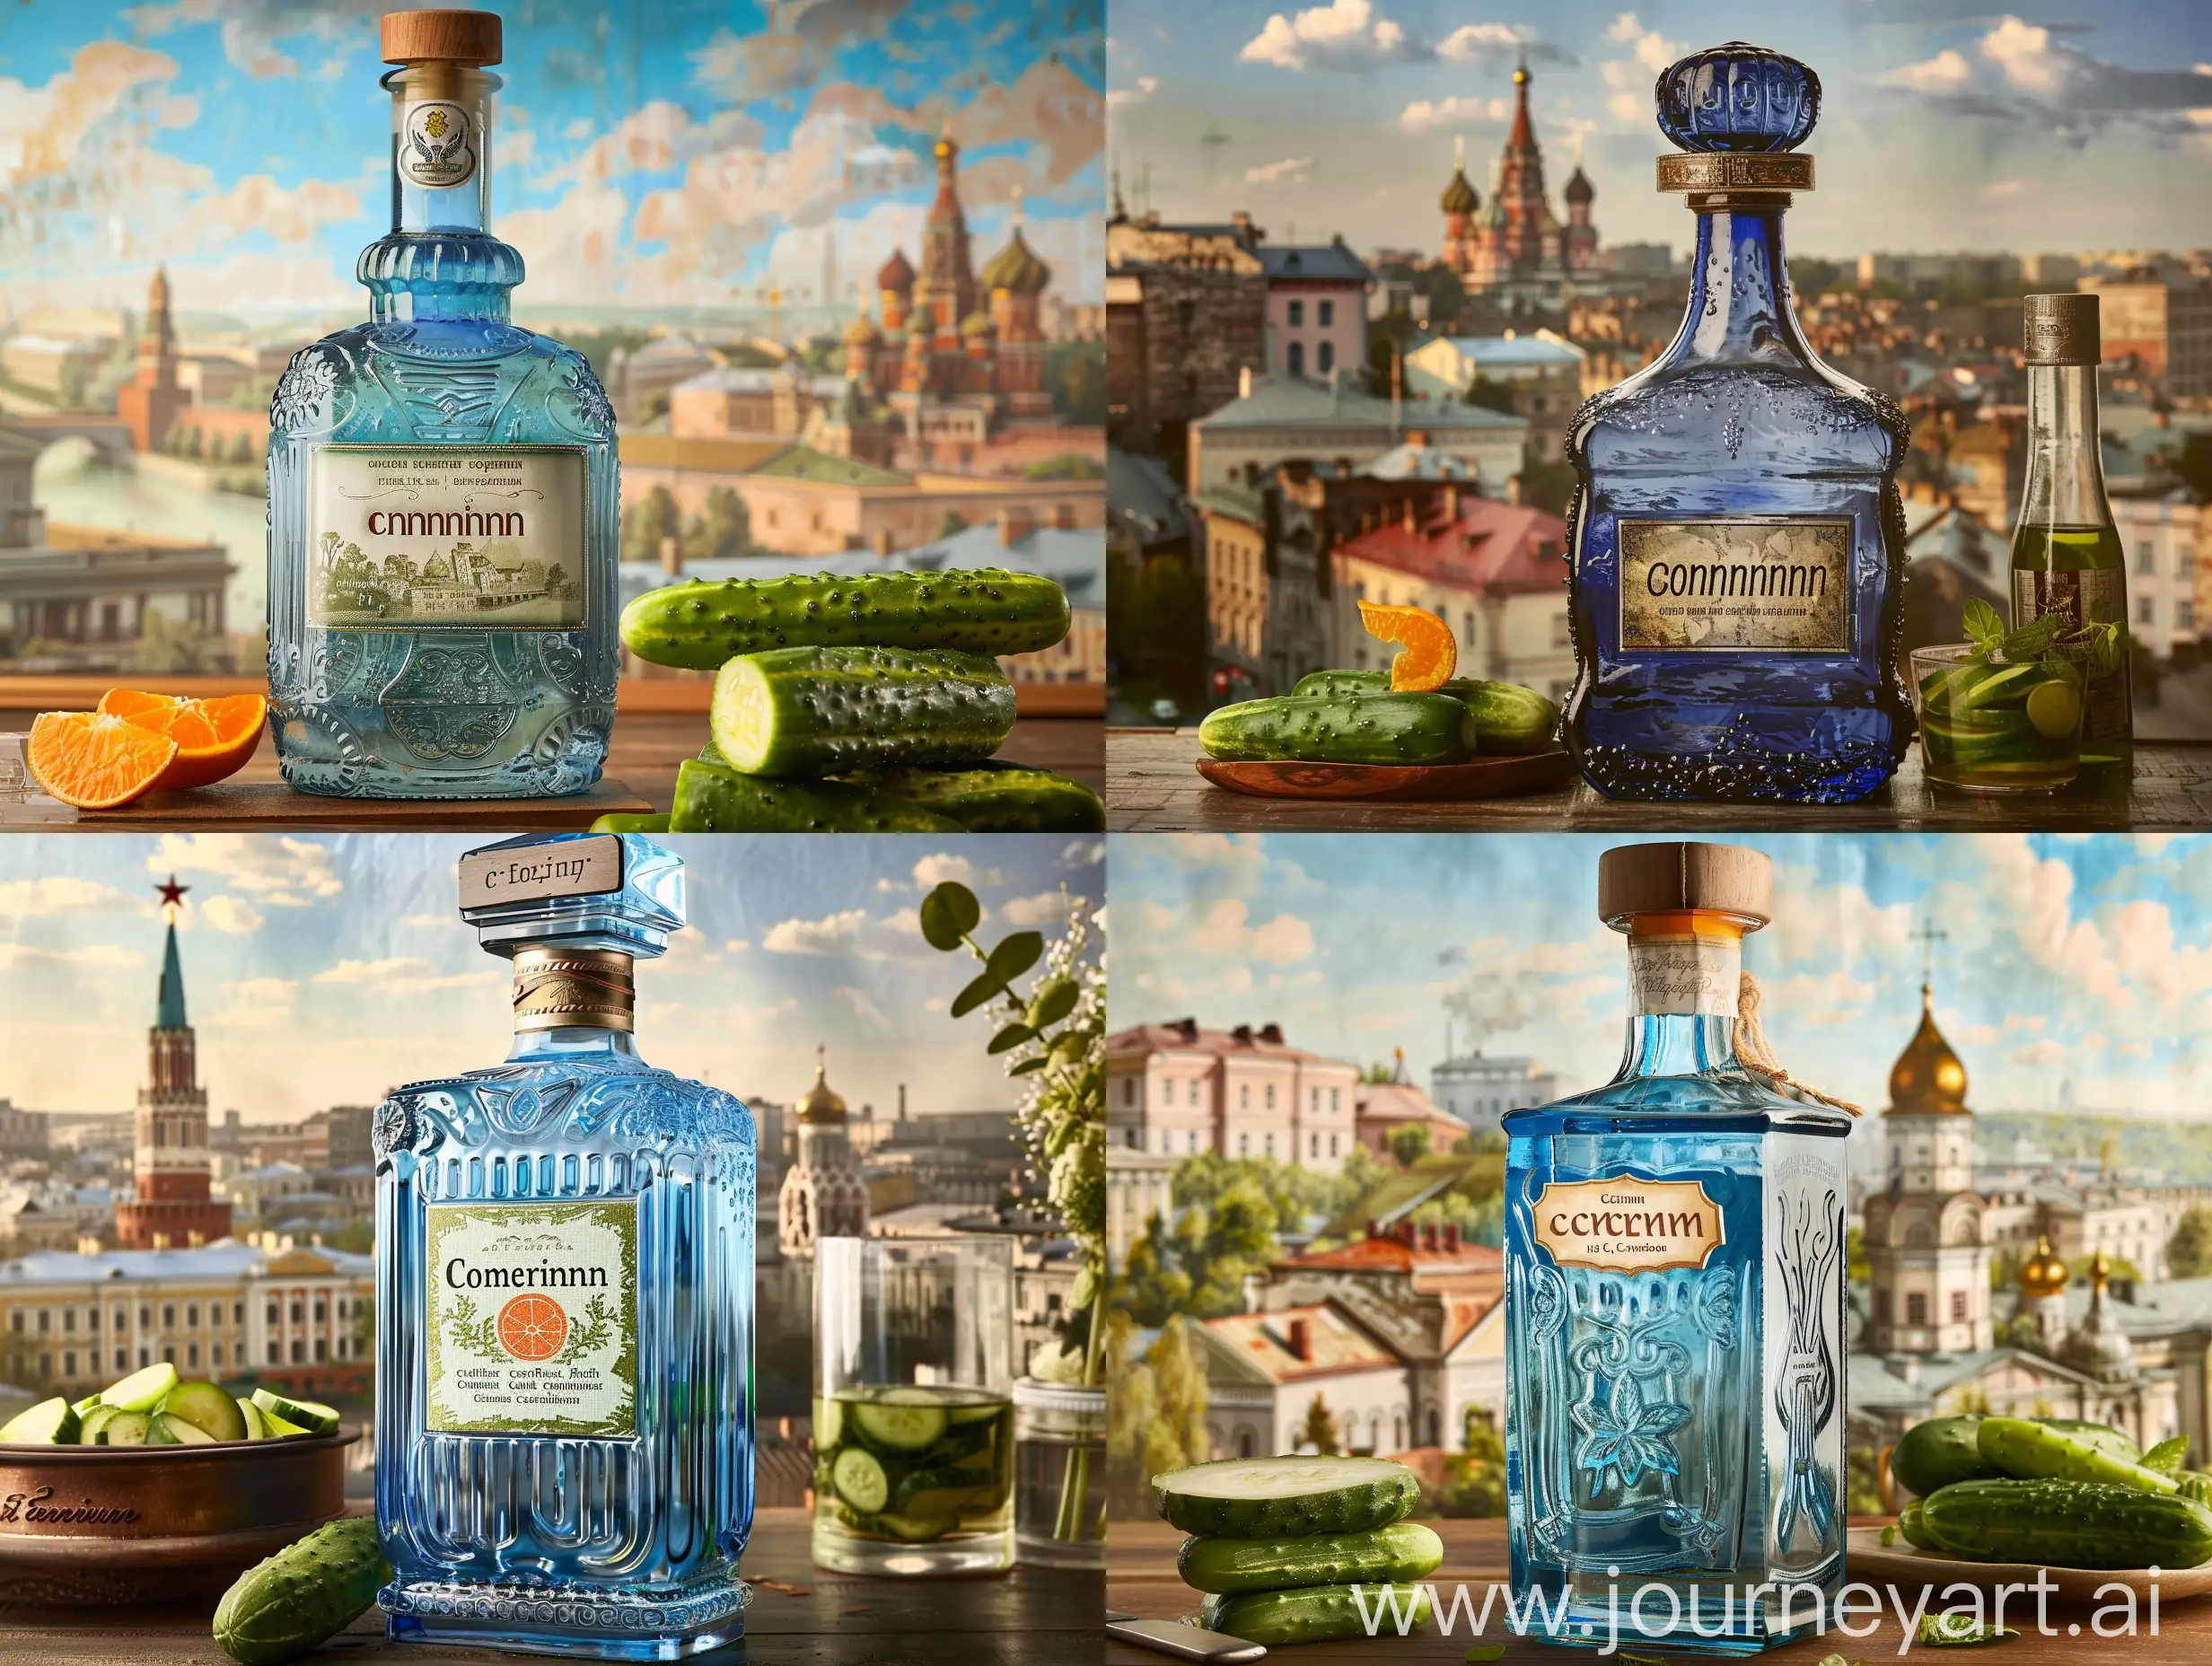 Clementine-Vodka-in-19th-Century-Ambiance-Vintage-Glass-Bottle-and-Old-Cityscape